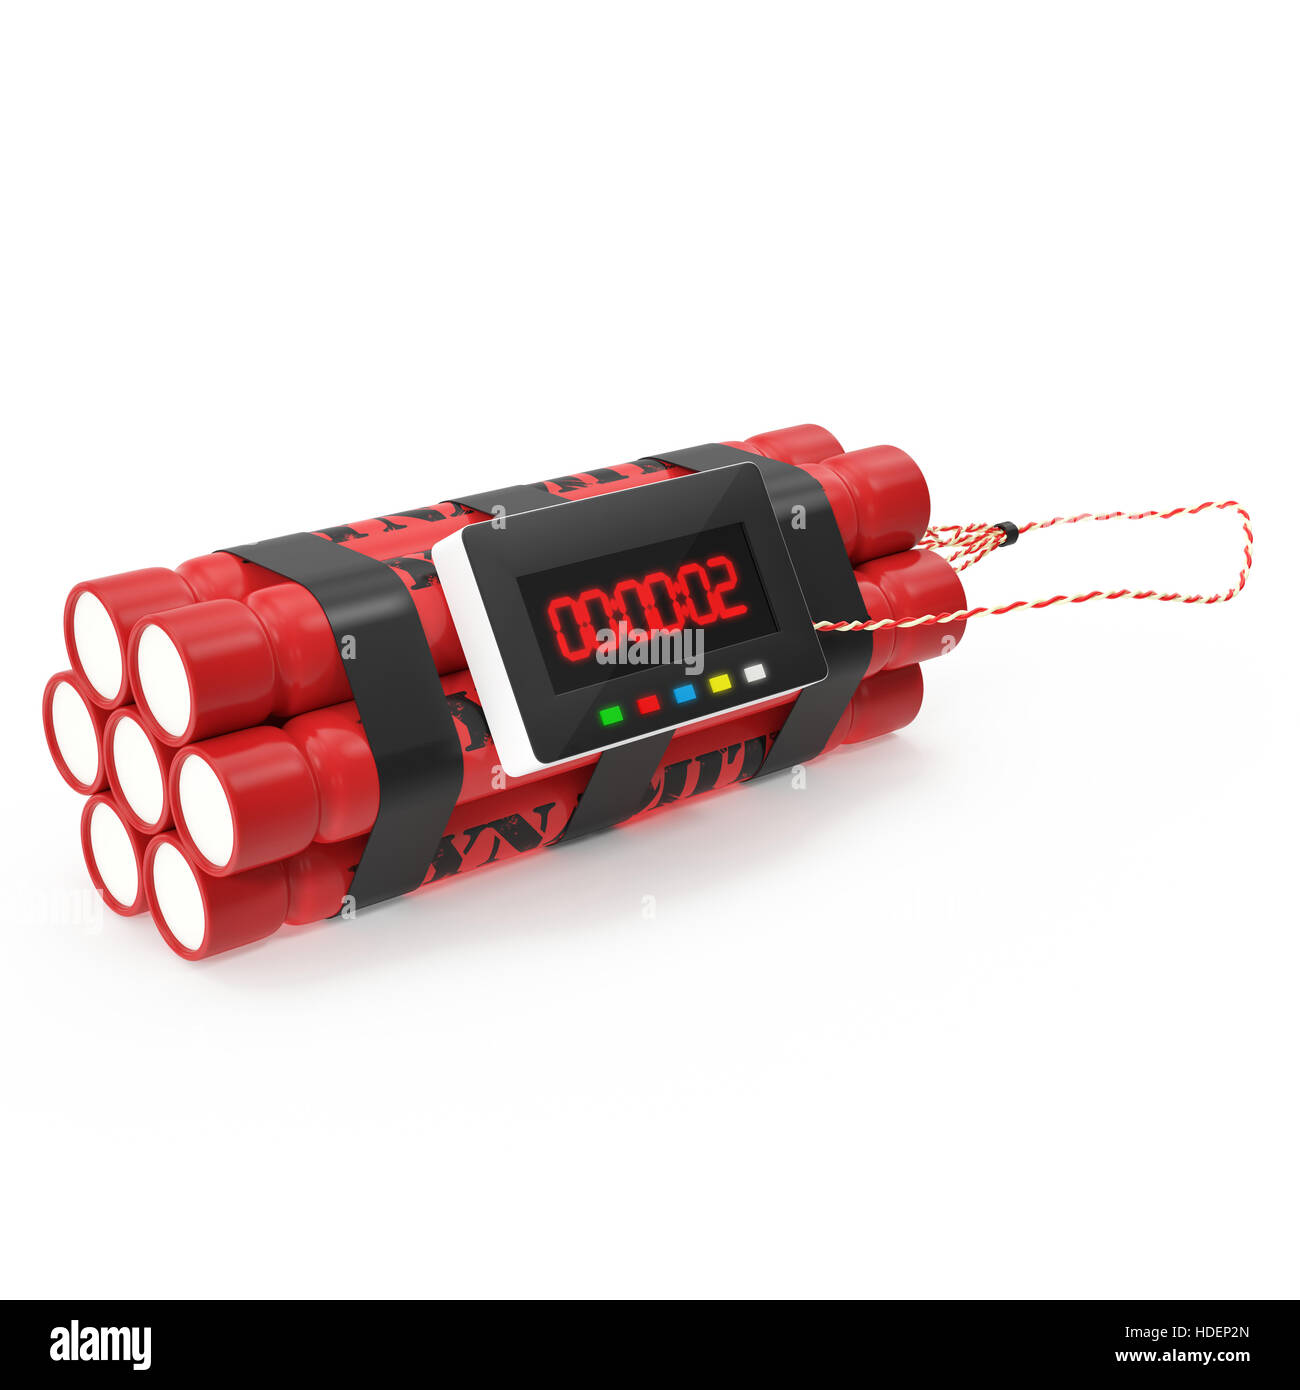 TNT dynamite red bomb with a timer isolated on a white background. Stock Photo